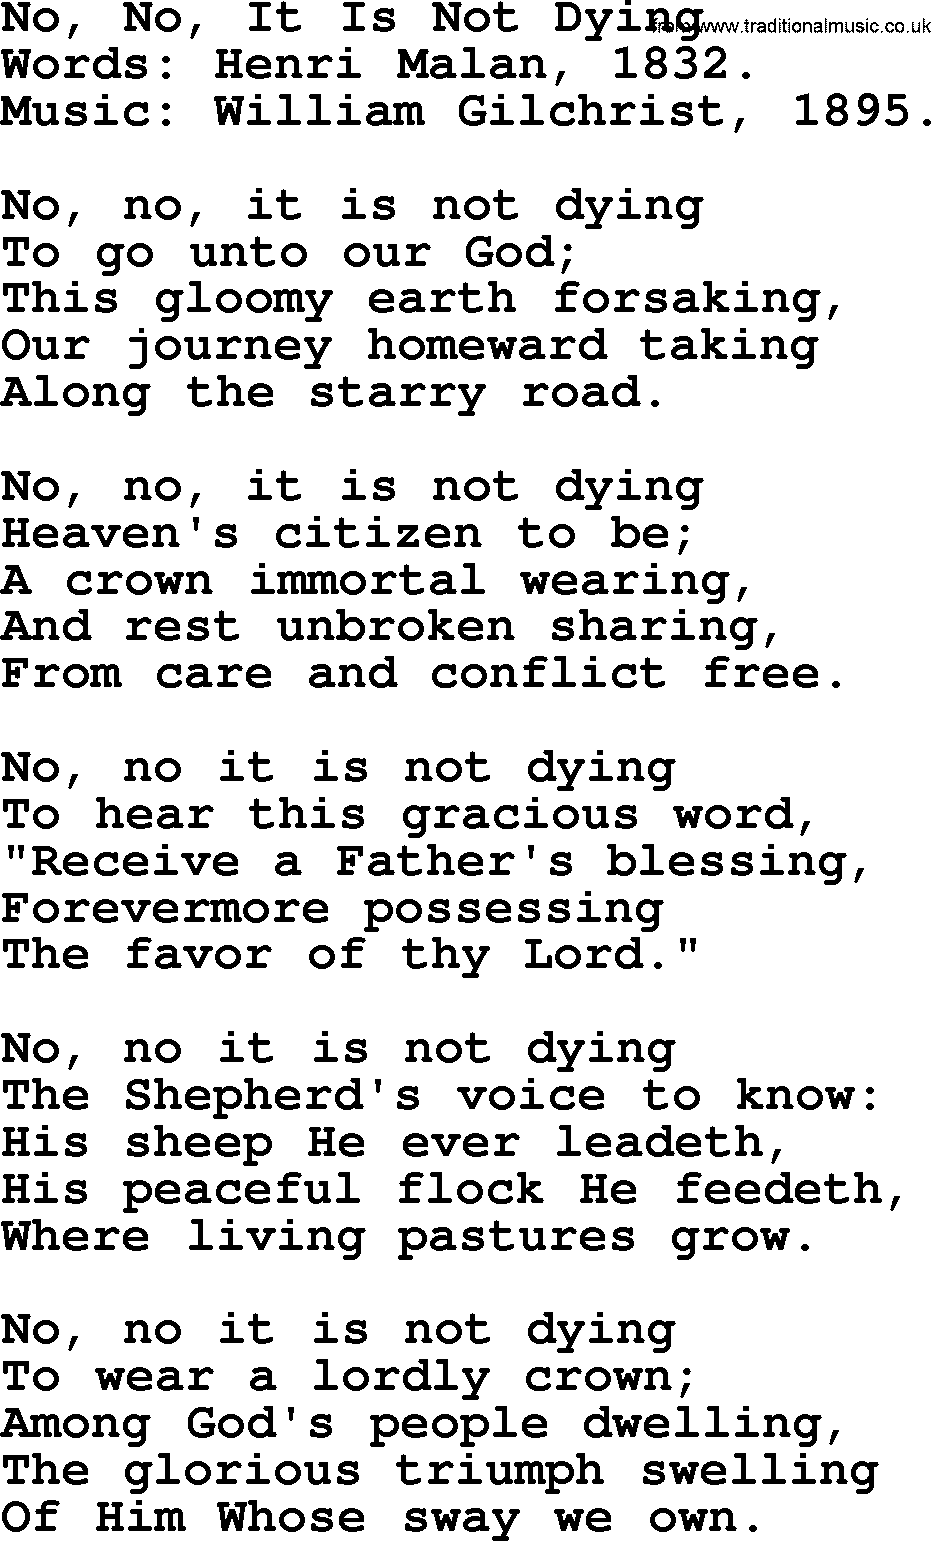 100+ Christian Funeral Hymns collection, Hymn: No, No, It Is Not Dying, lyrics and PDF